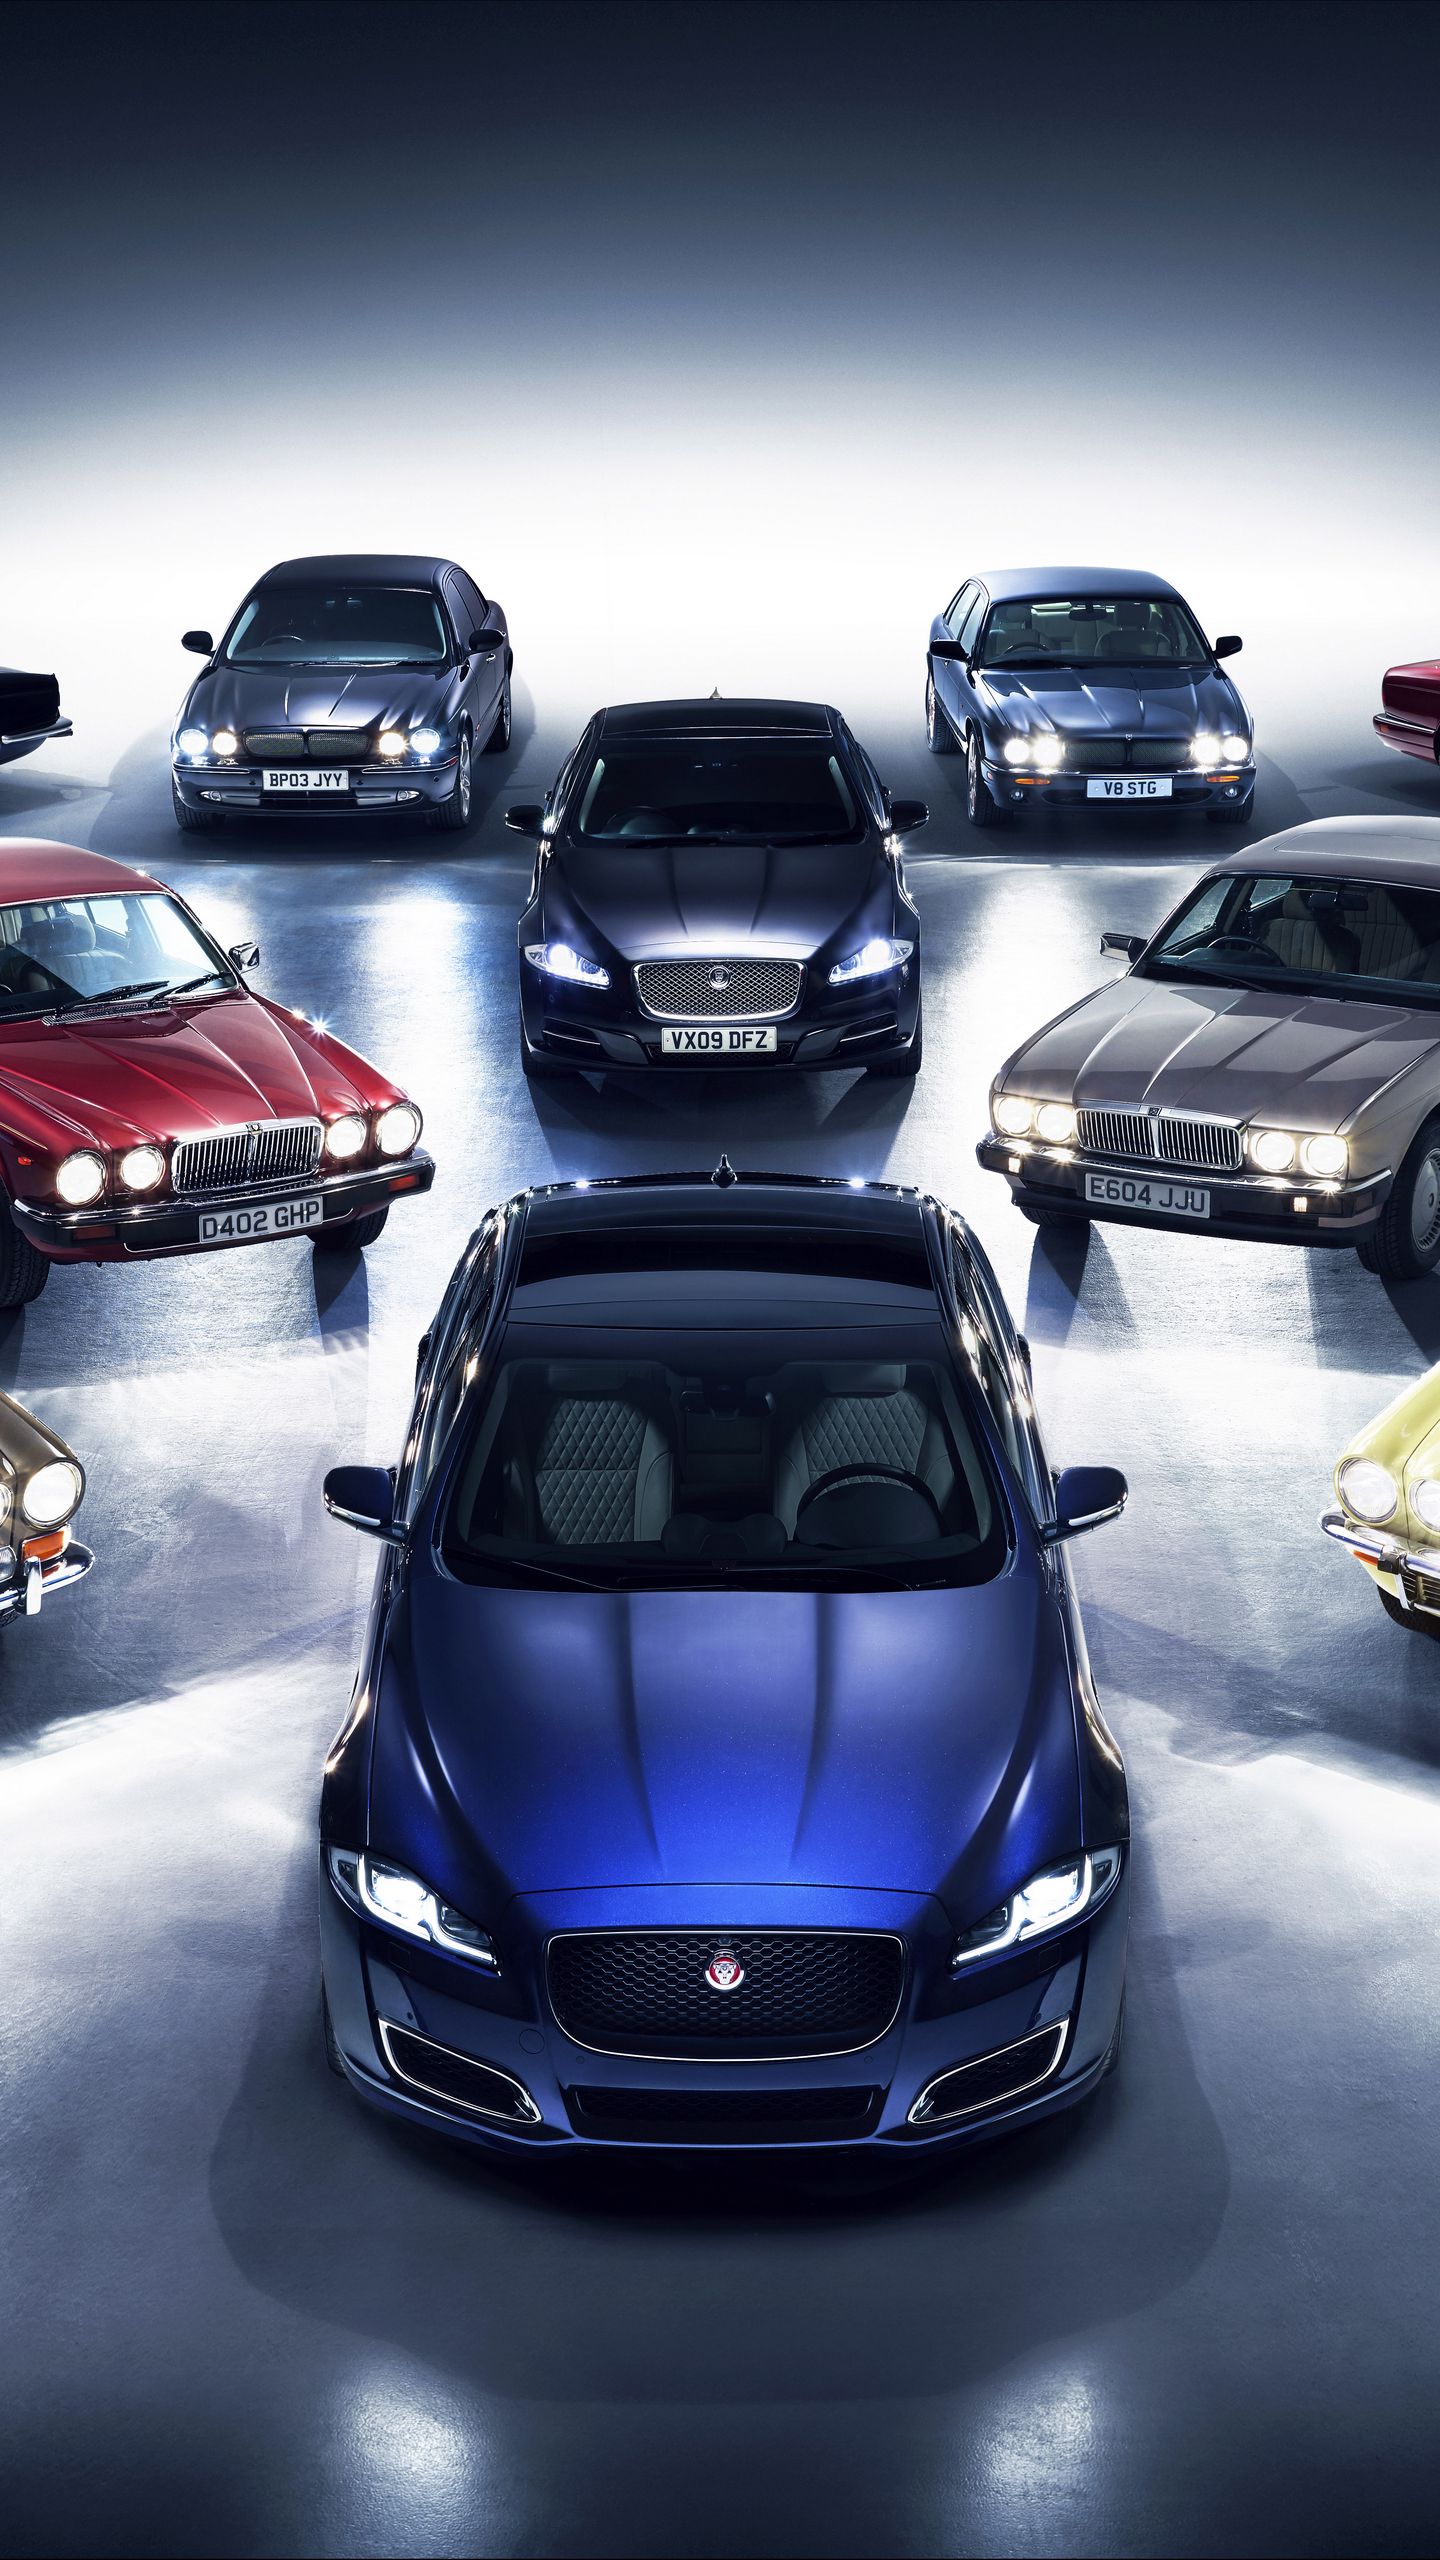 220+ Jaguar Cars HD Wallpapers and Backgrounds